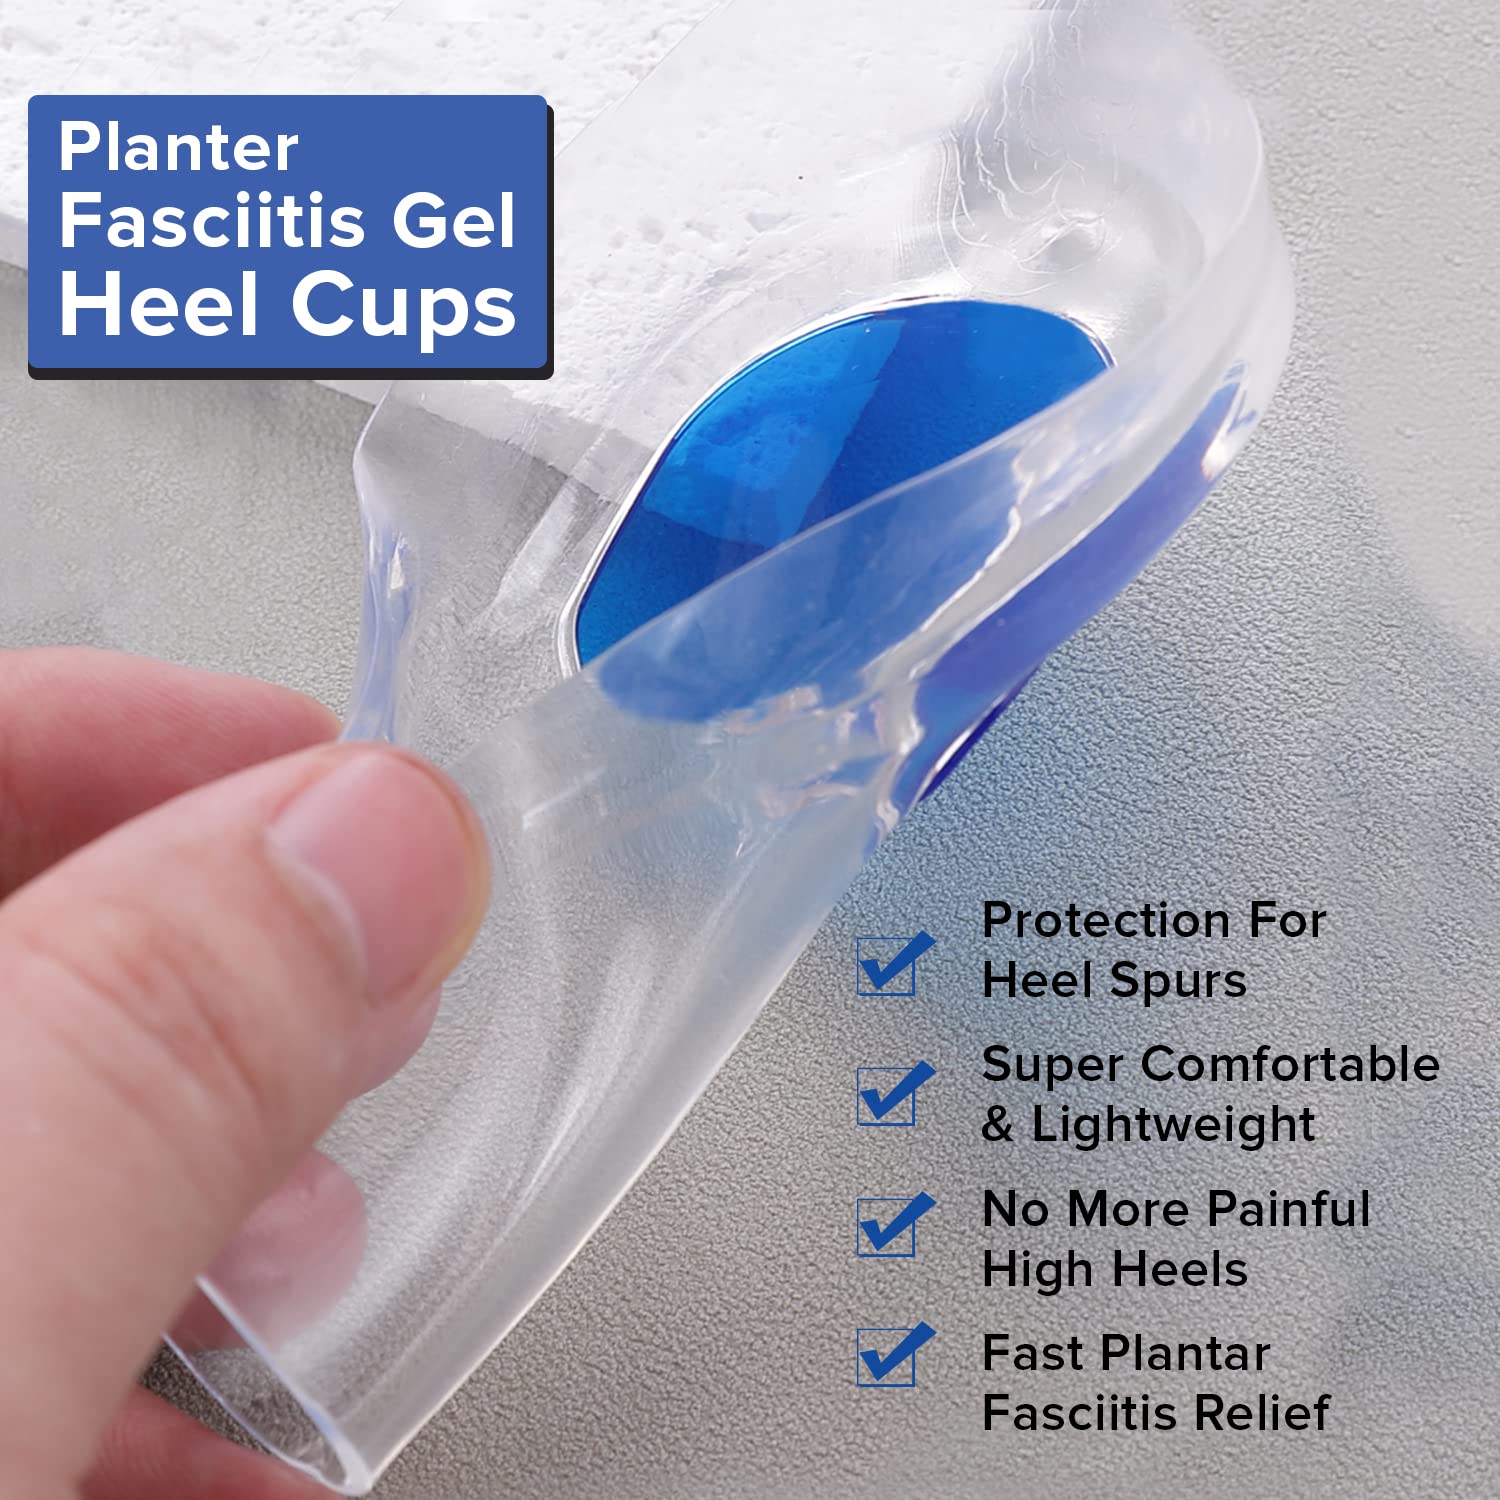 Dr Foot Silicone Gel Heel Cups With Shock Absorbing Support | For Plantar Fasciitis, Achilles Pain, Orthotic Inserts, Heel Cups For Heel Pain & Spurs| For Men & Women (Size - S) (Pack of 5)